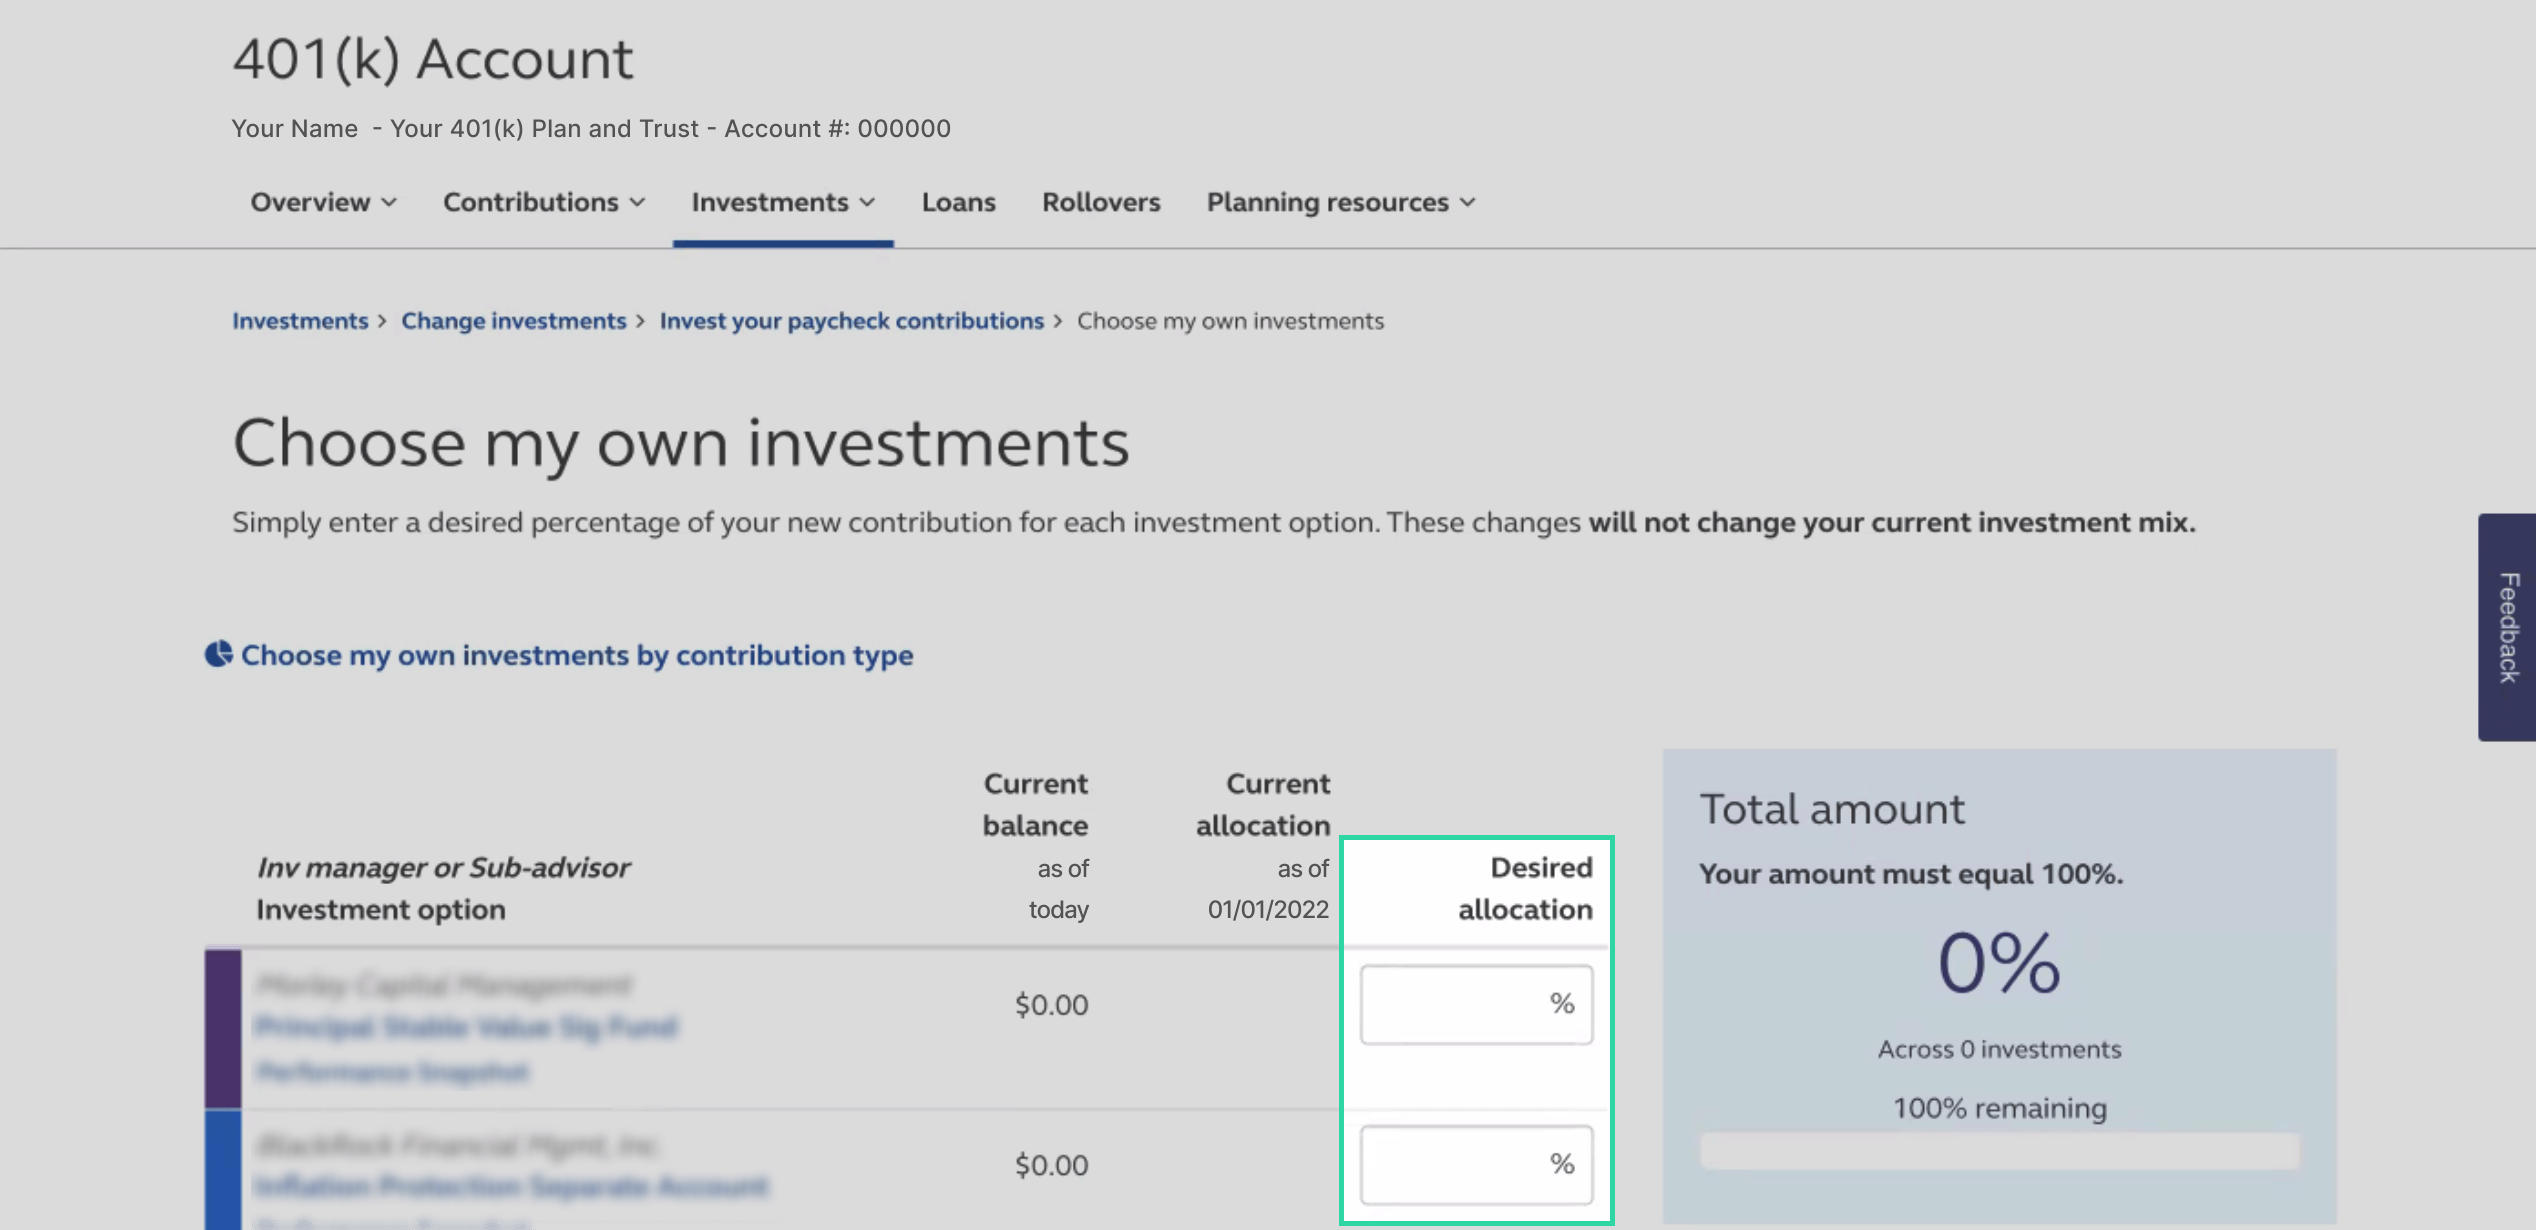 On the “Choose my own investments” page, input the desired % allocation to each of the funds. Make sure that this matches Capitalize’s recommendation! Make sure to save your changes.